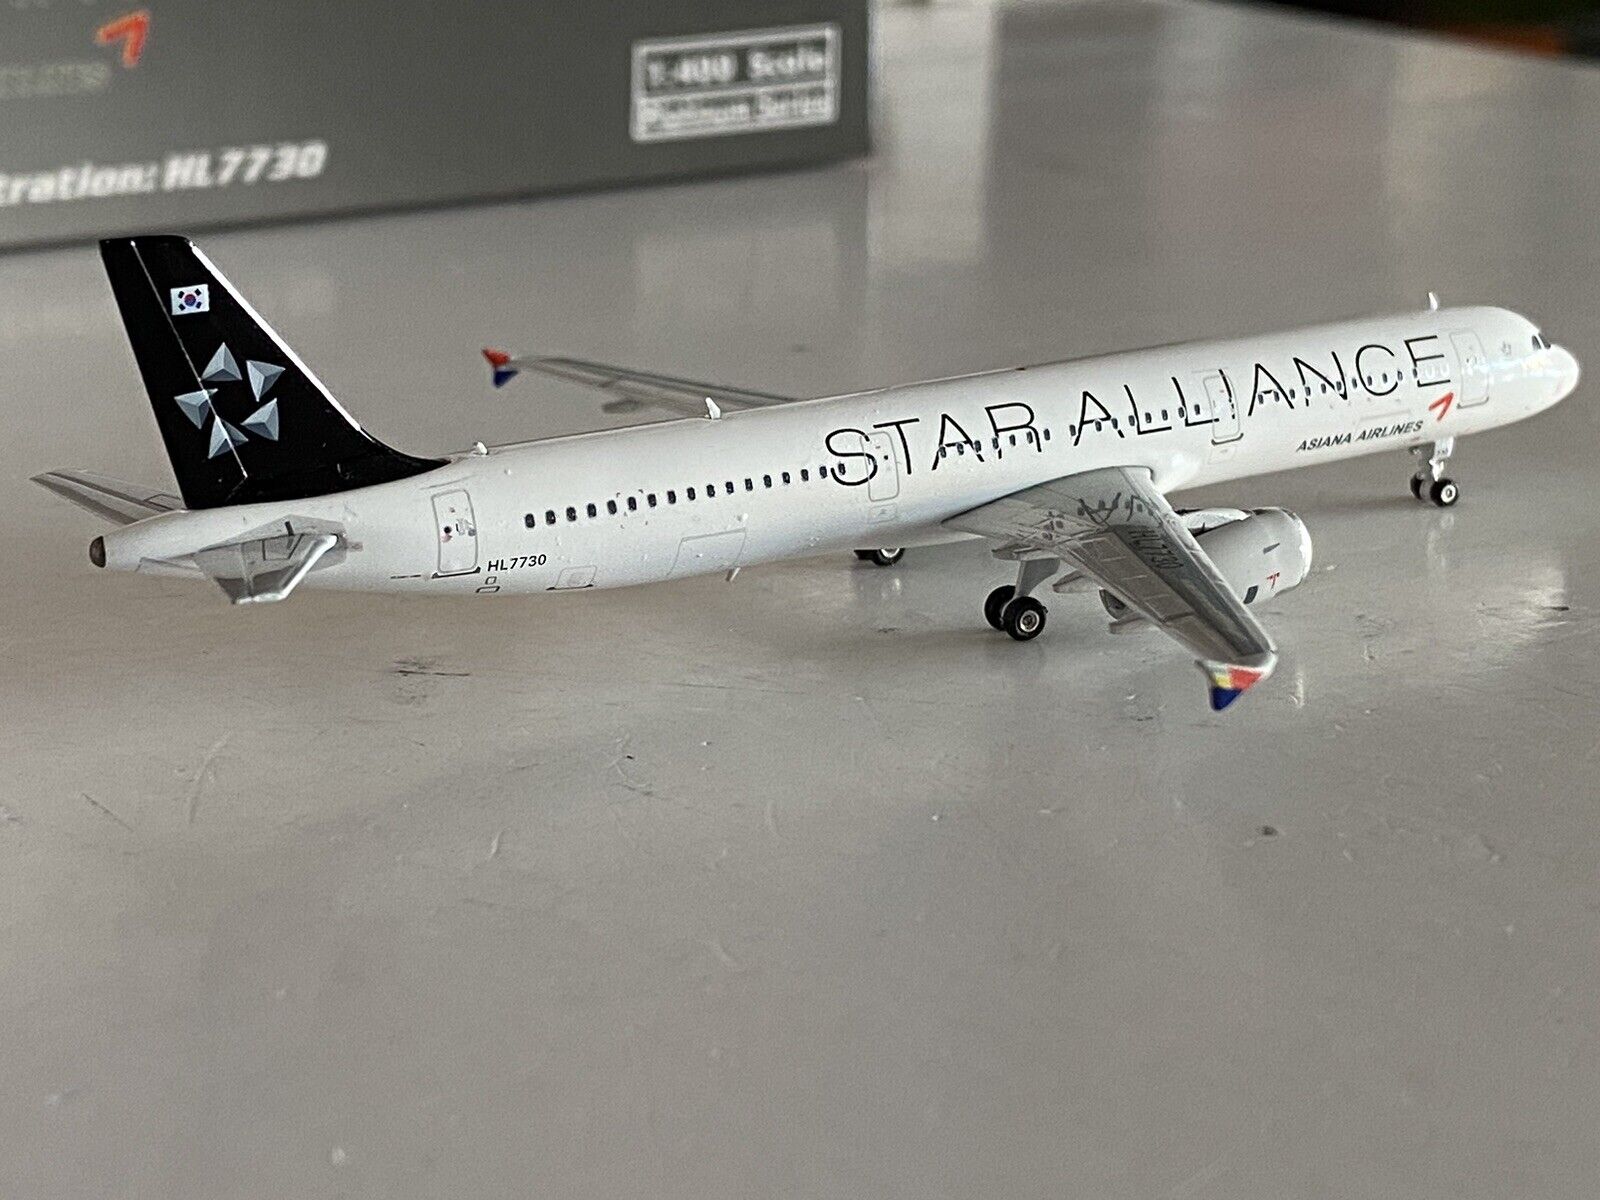 Phoenix Models Asiana Airlines Airbus A321-200 1:400 HL7730 Star Alliance